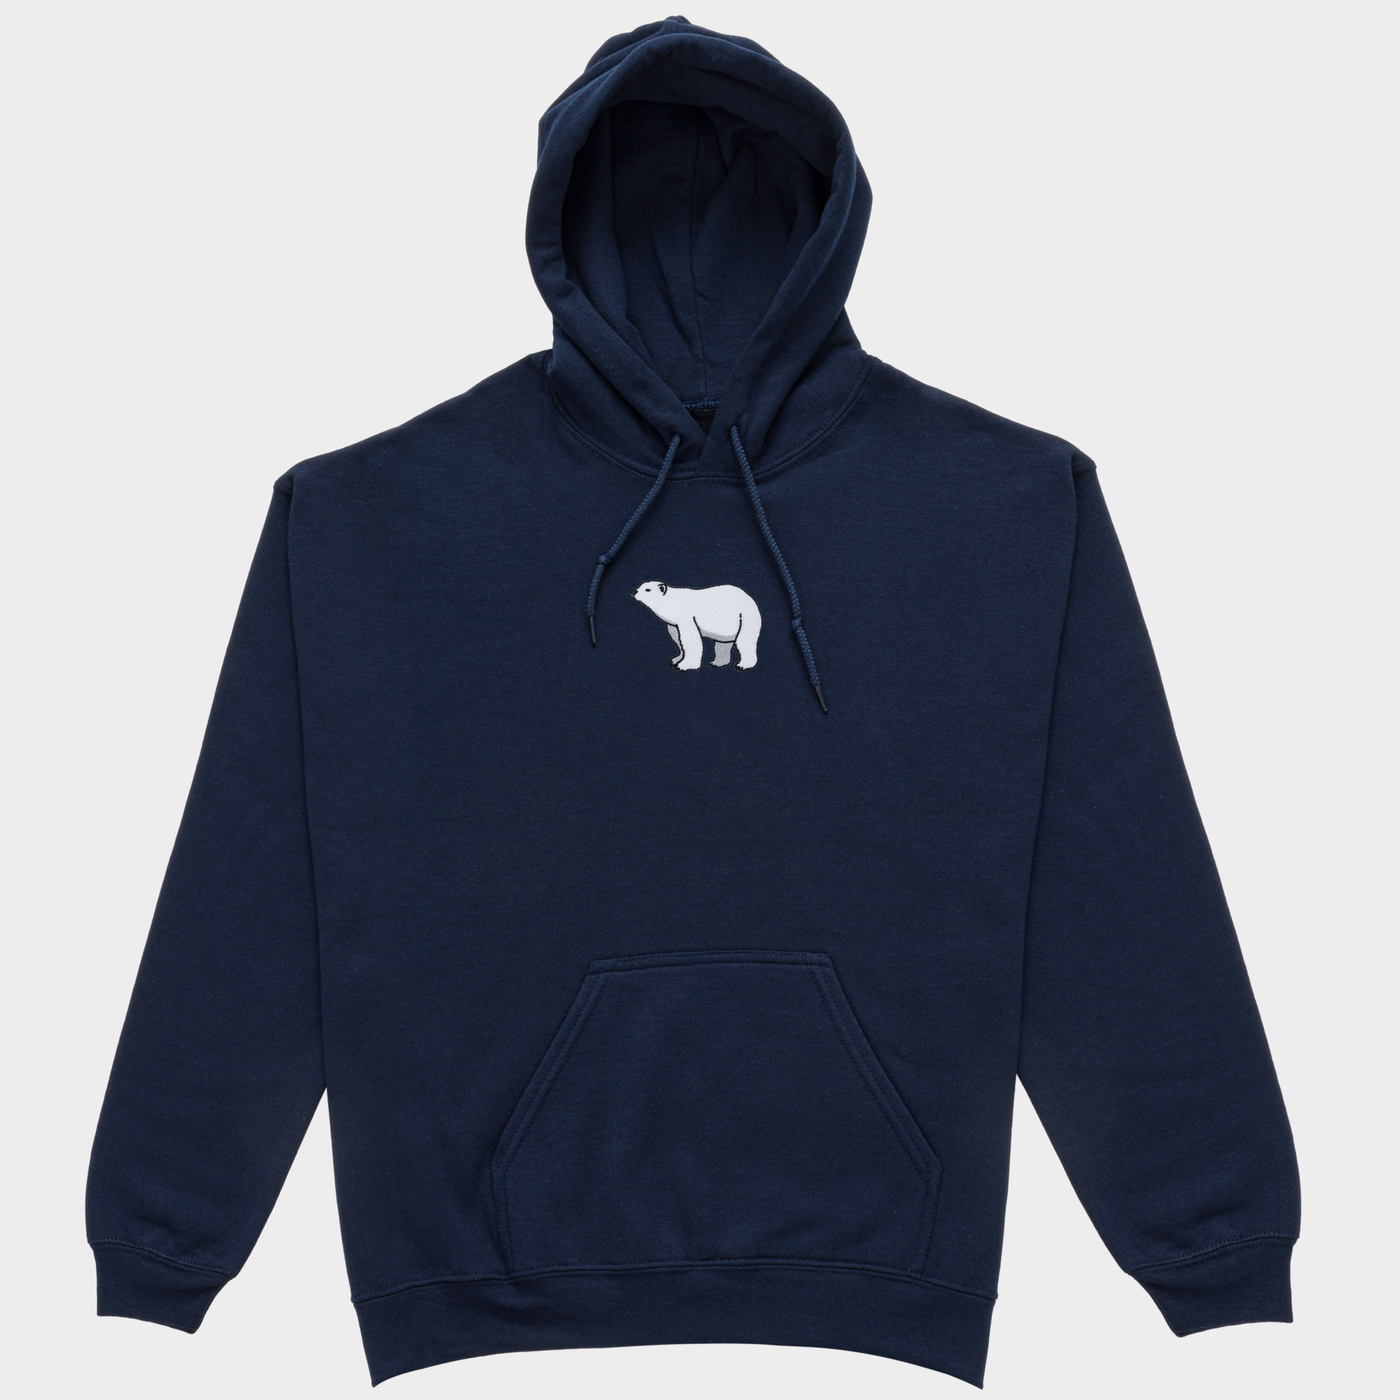 Bobby's Planet Women's Embroidered Polar Bear Hoodie from Arctic Polar Animals Collection in Navy Color#color_navy